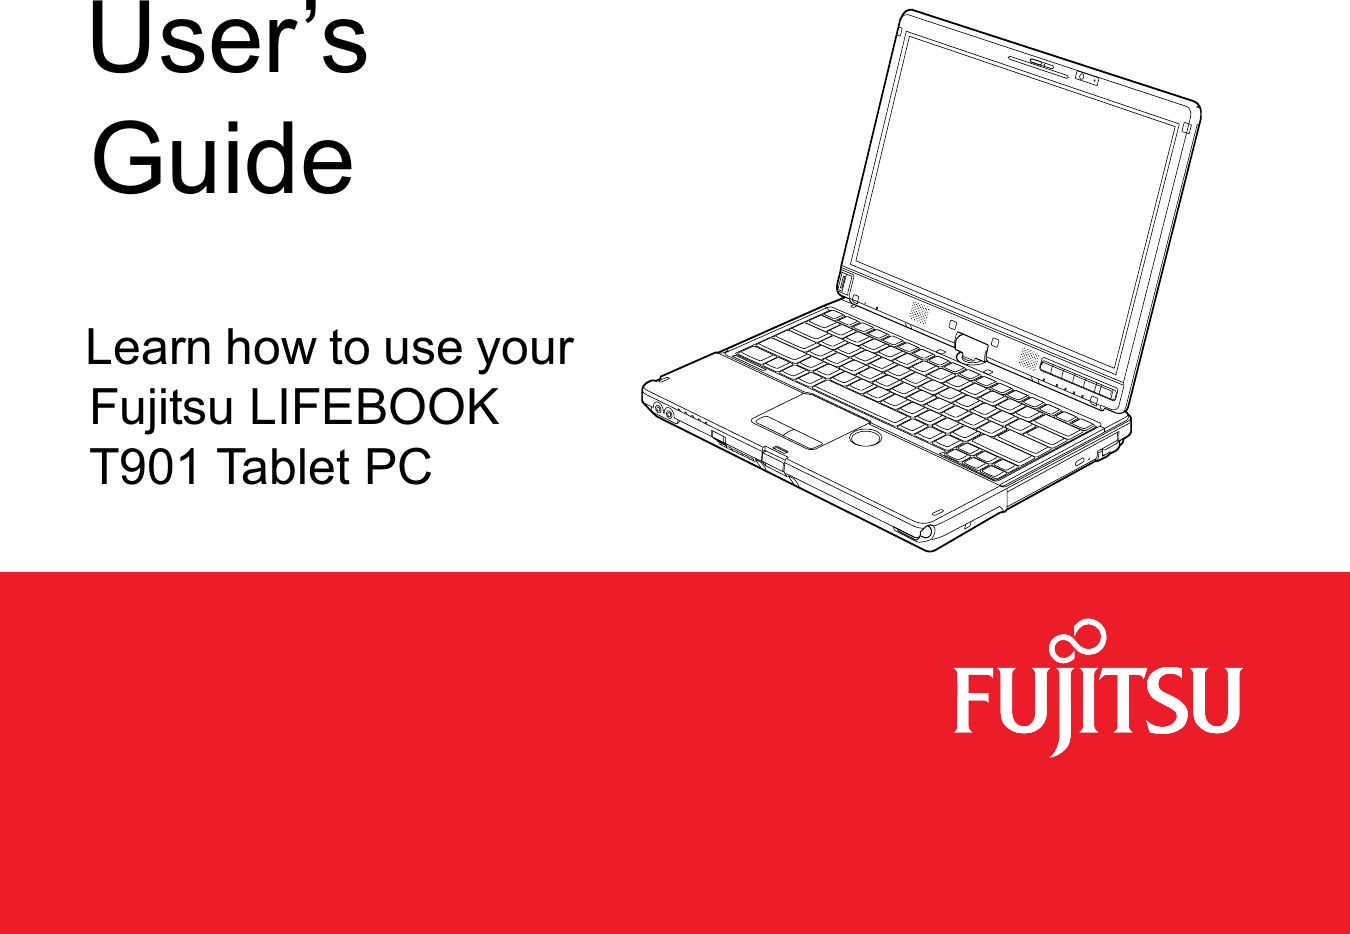 1 - User’s GuideLearn how to use your Fujitsu LIFEBOOK T901 Tablet PCDRAFT